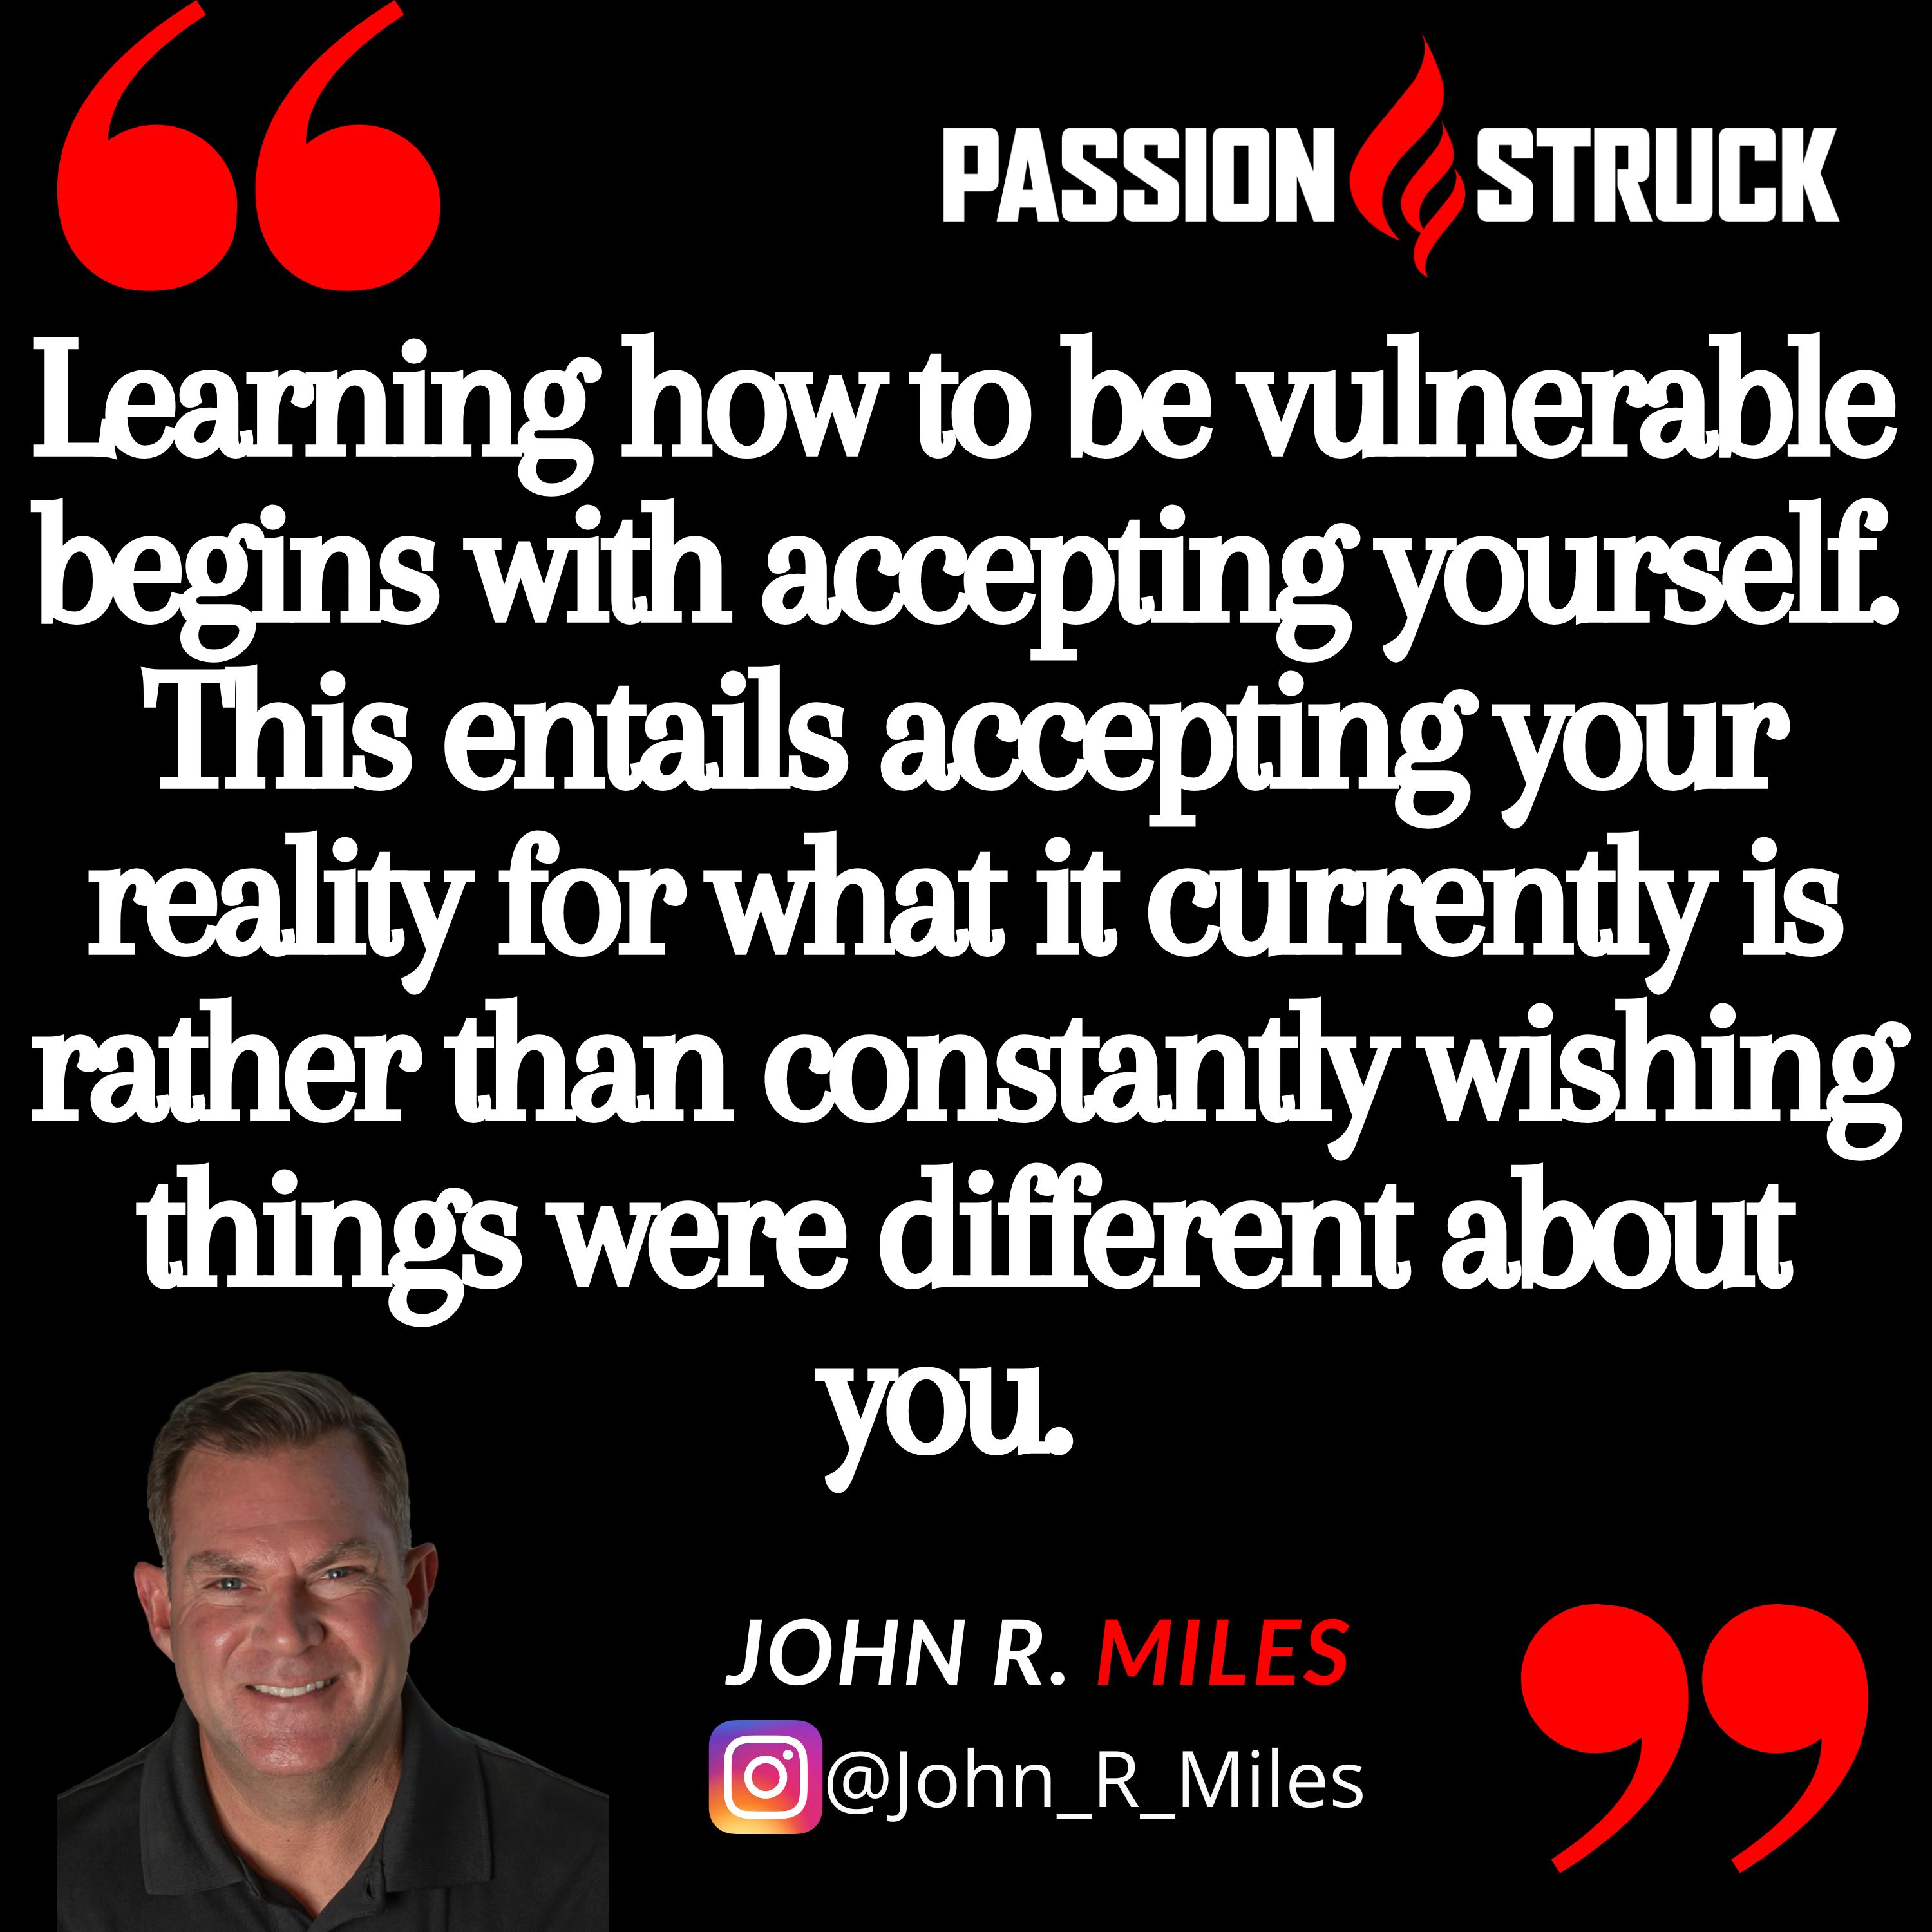 Quote by John R. Miles on how to be vulnerable: Learning how to be vulnerable begins with accepting yourself. This entails accepting your reality for what it currently is rather than constantly wishing things were different about you